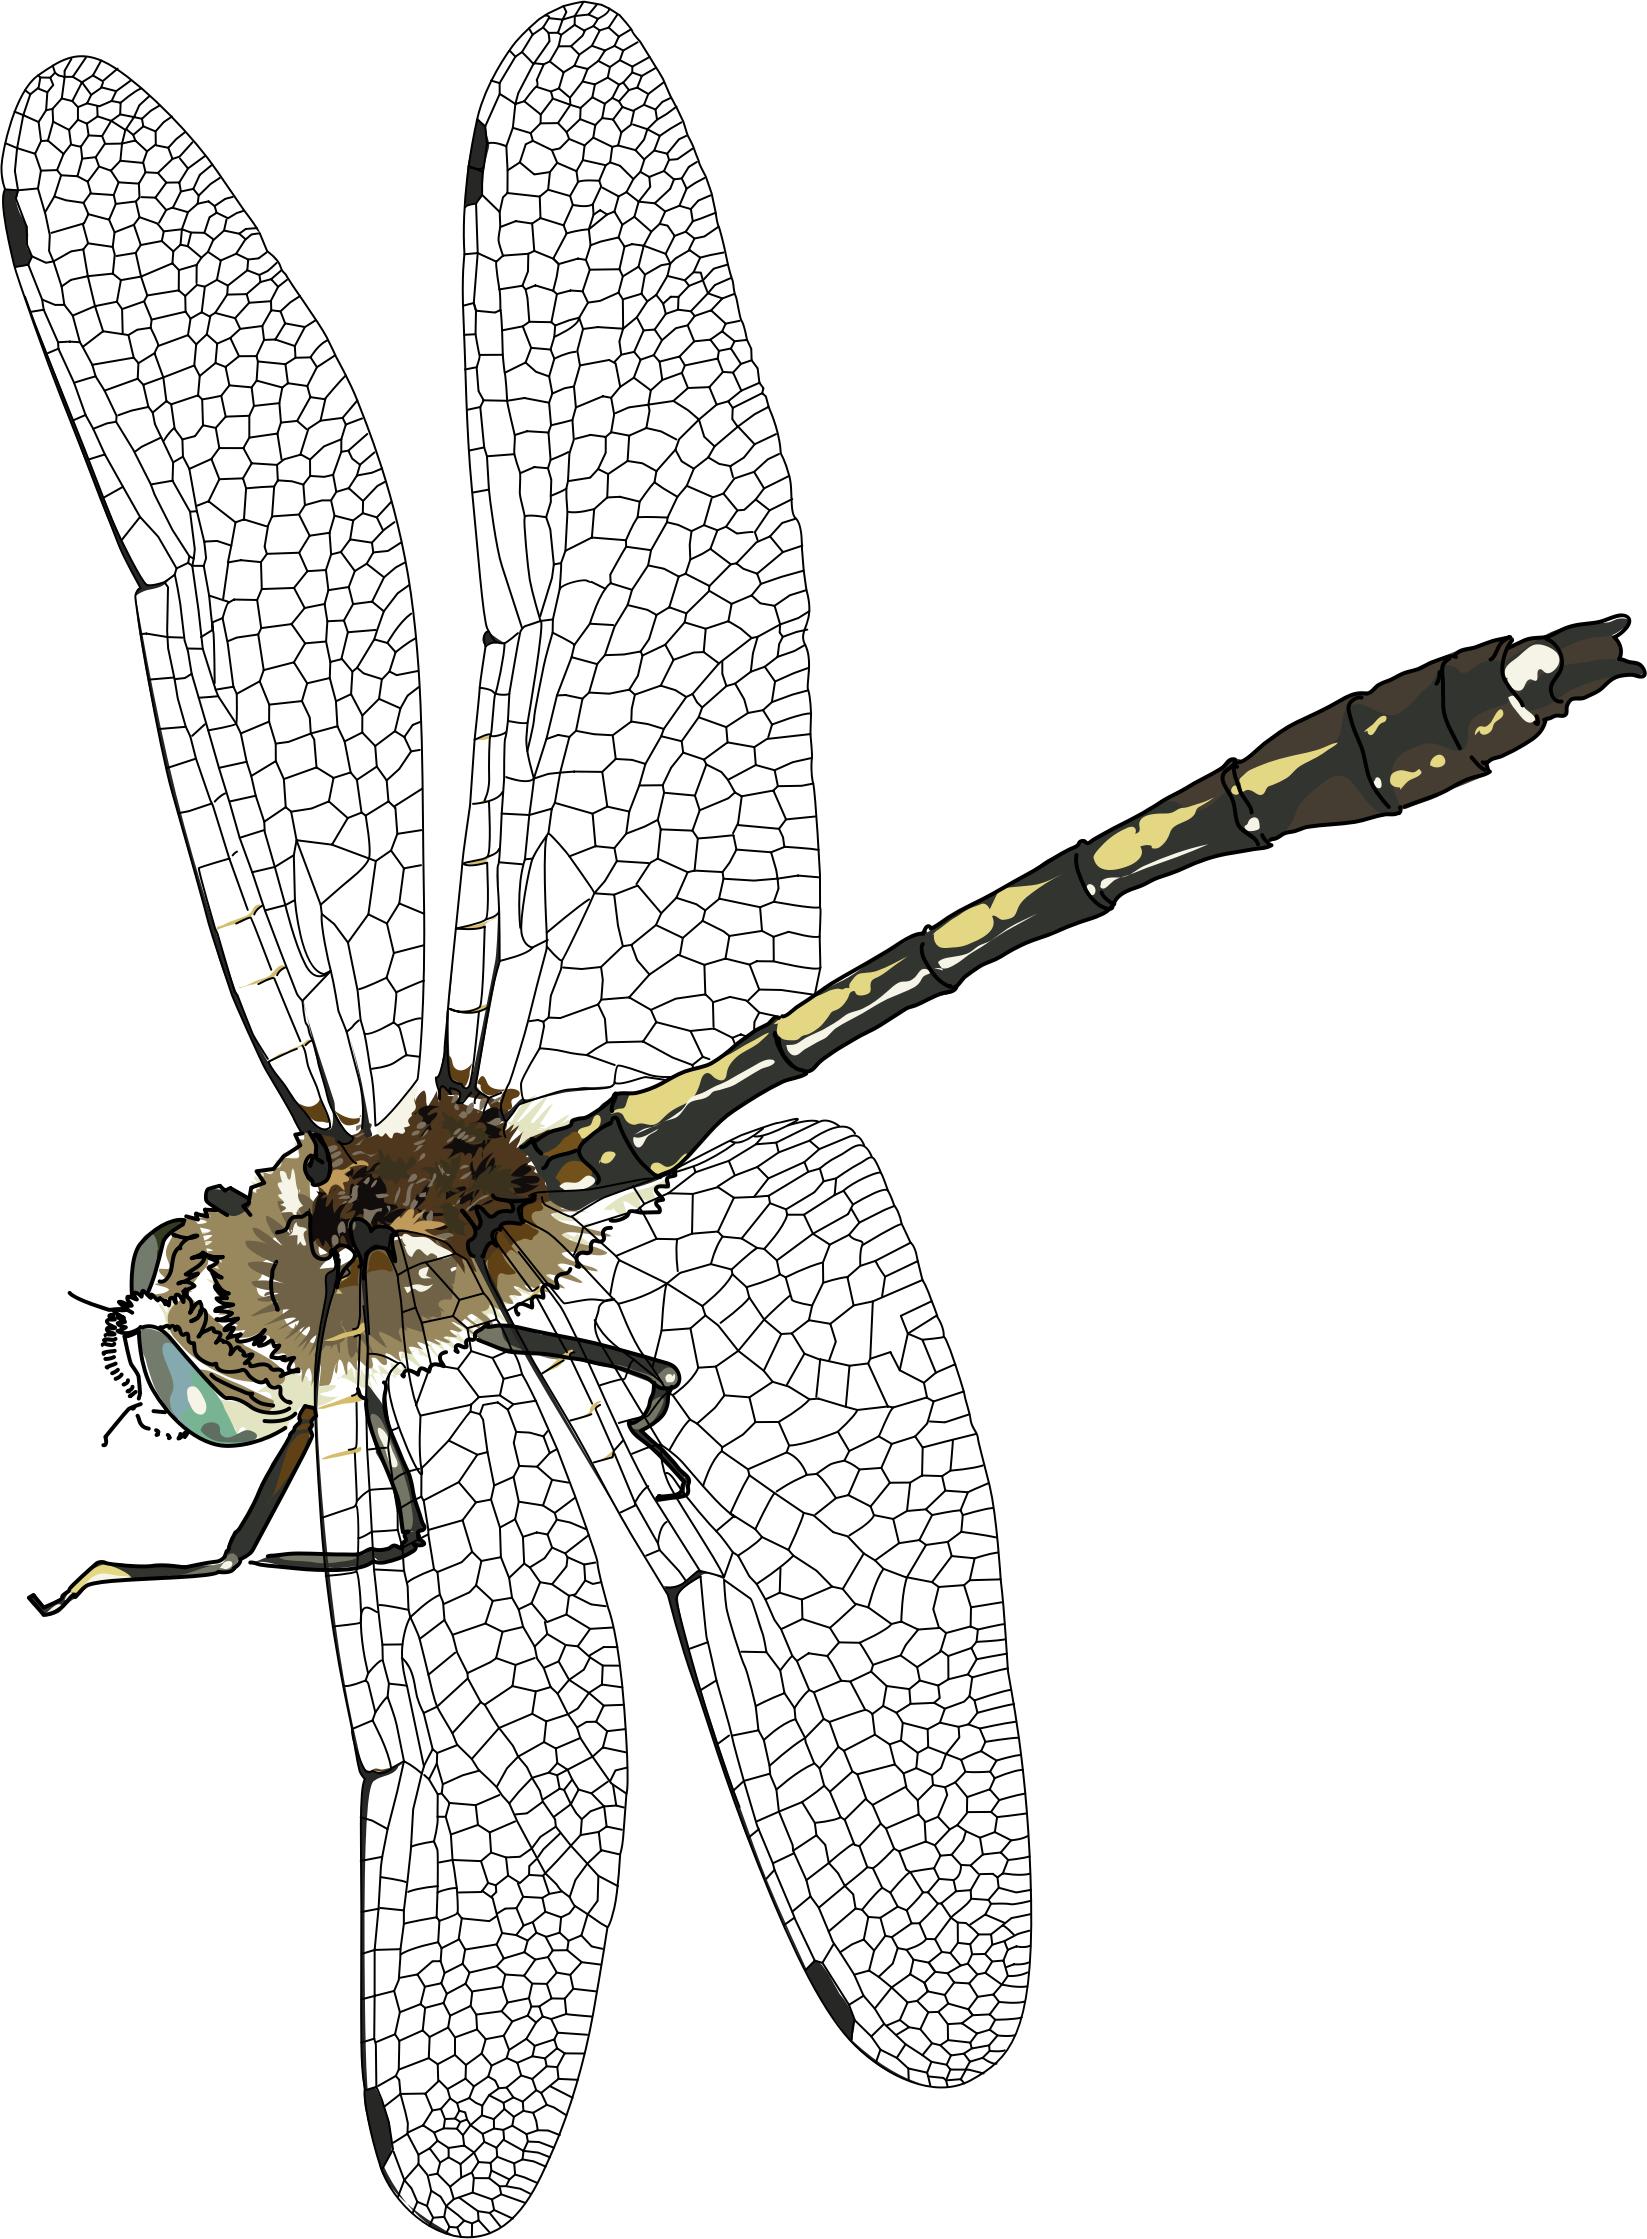 Libelulle, dragonfly png